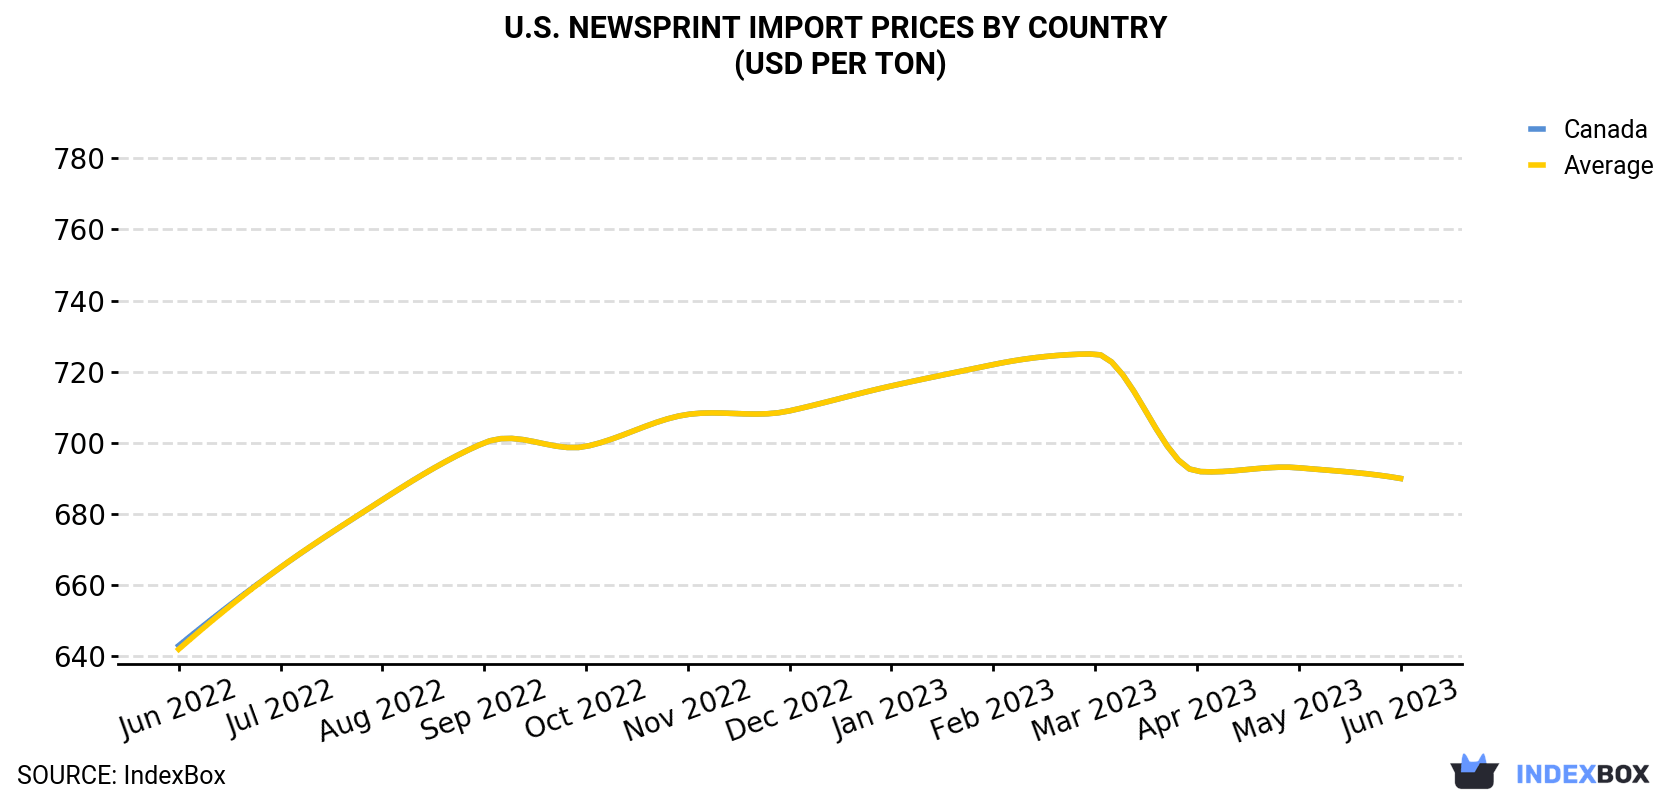 U.S. Newsprint Import Prices By Country (USD Per Ton)